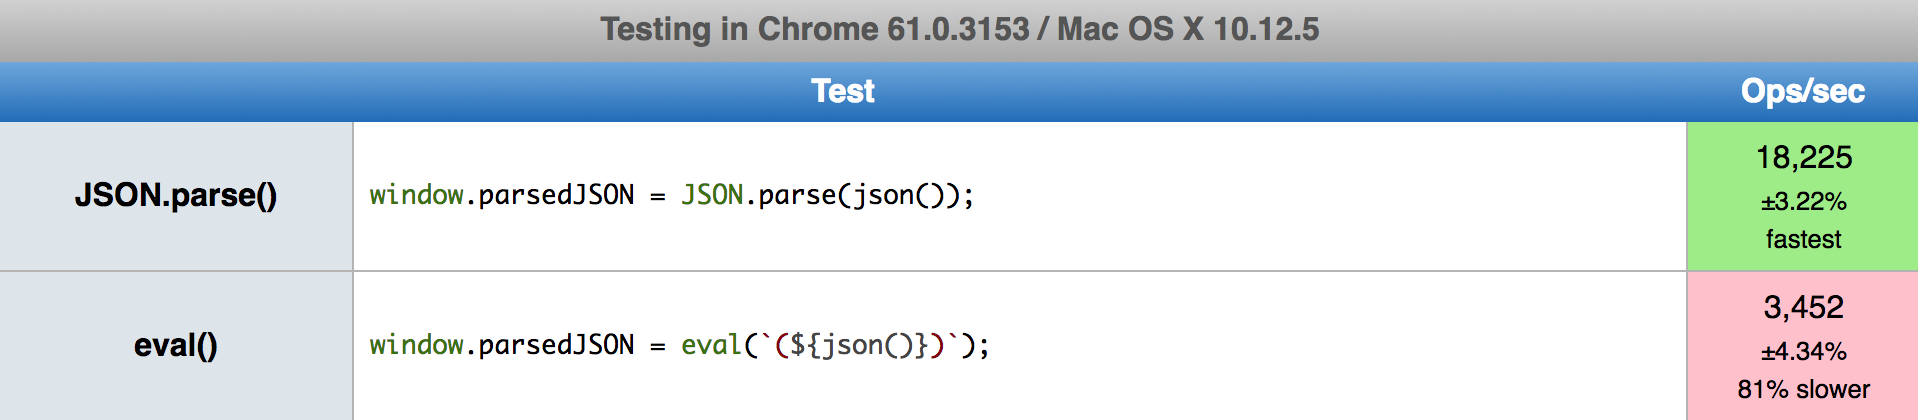 Corrected benchmark: JSON.parse is 18,225 operations per second, while eval is only 3,452 operations per second